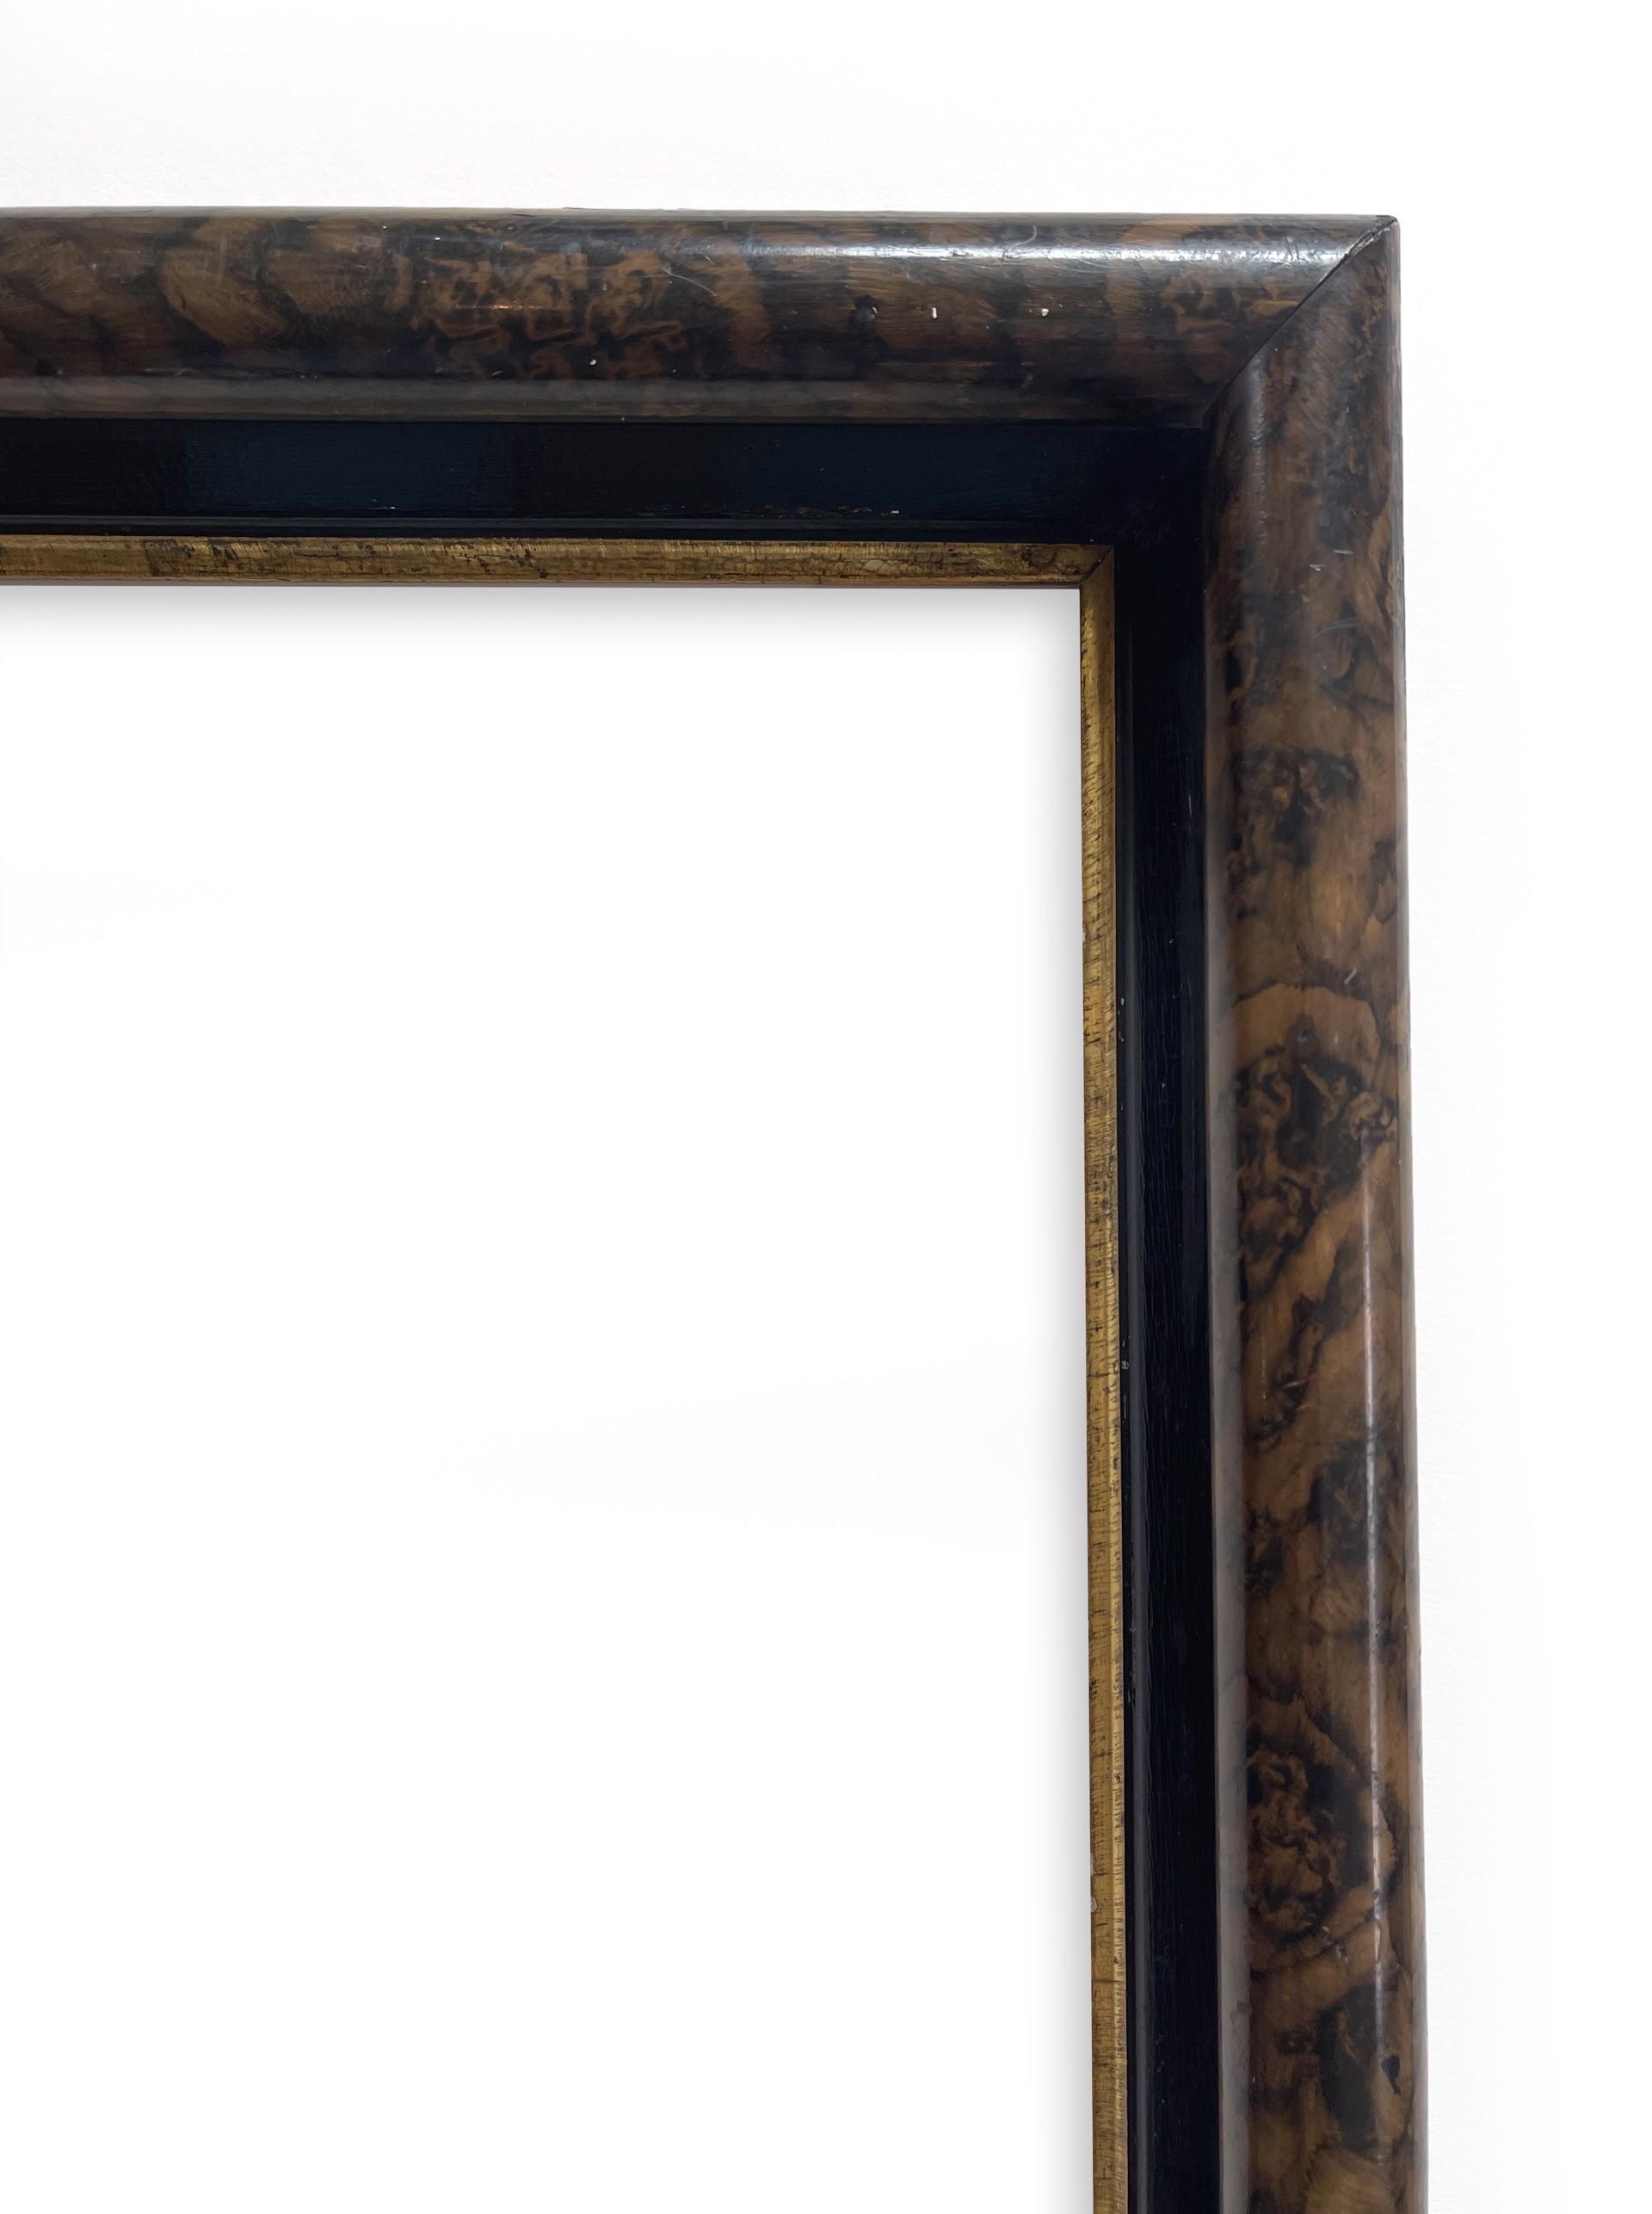 Antique Victorian Faux Marble Frame by Antique Frame